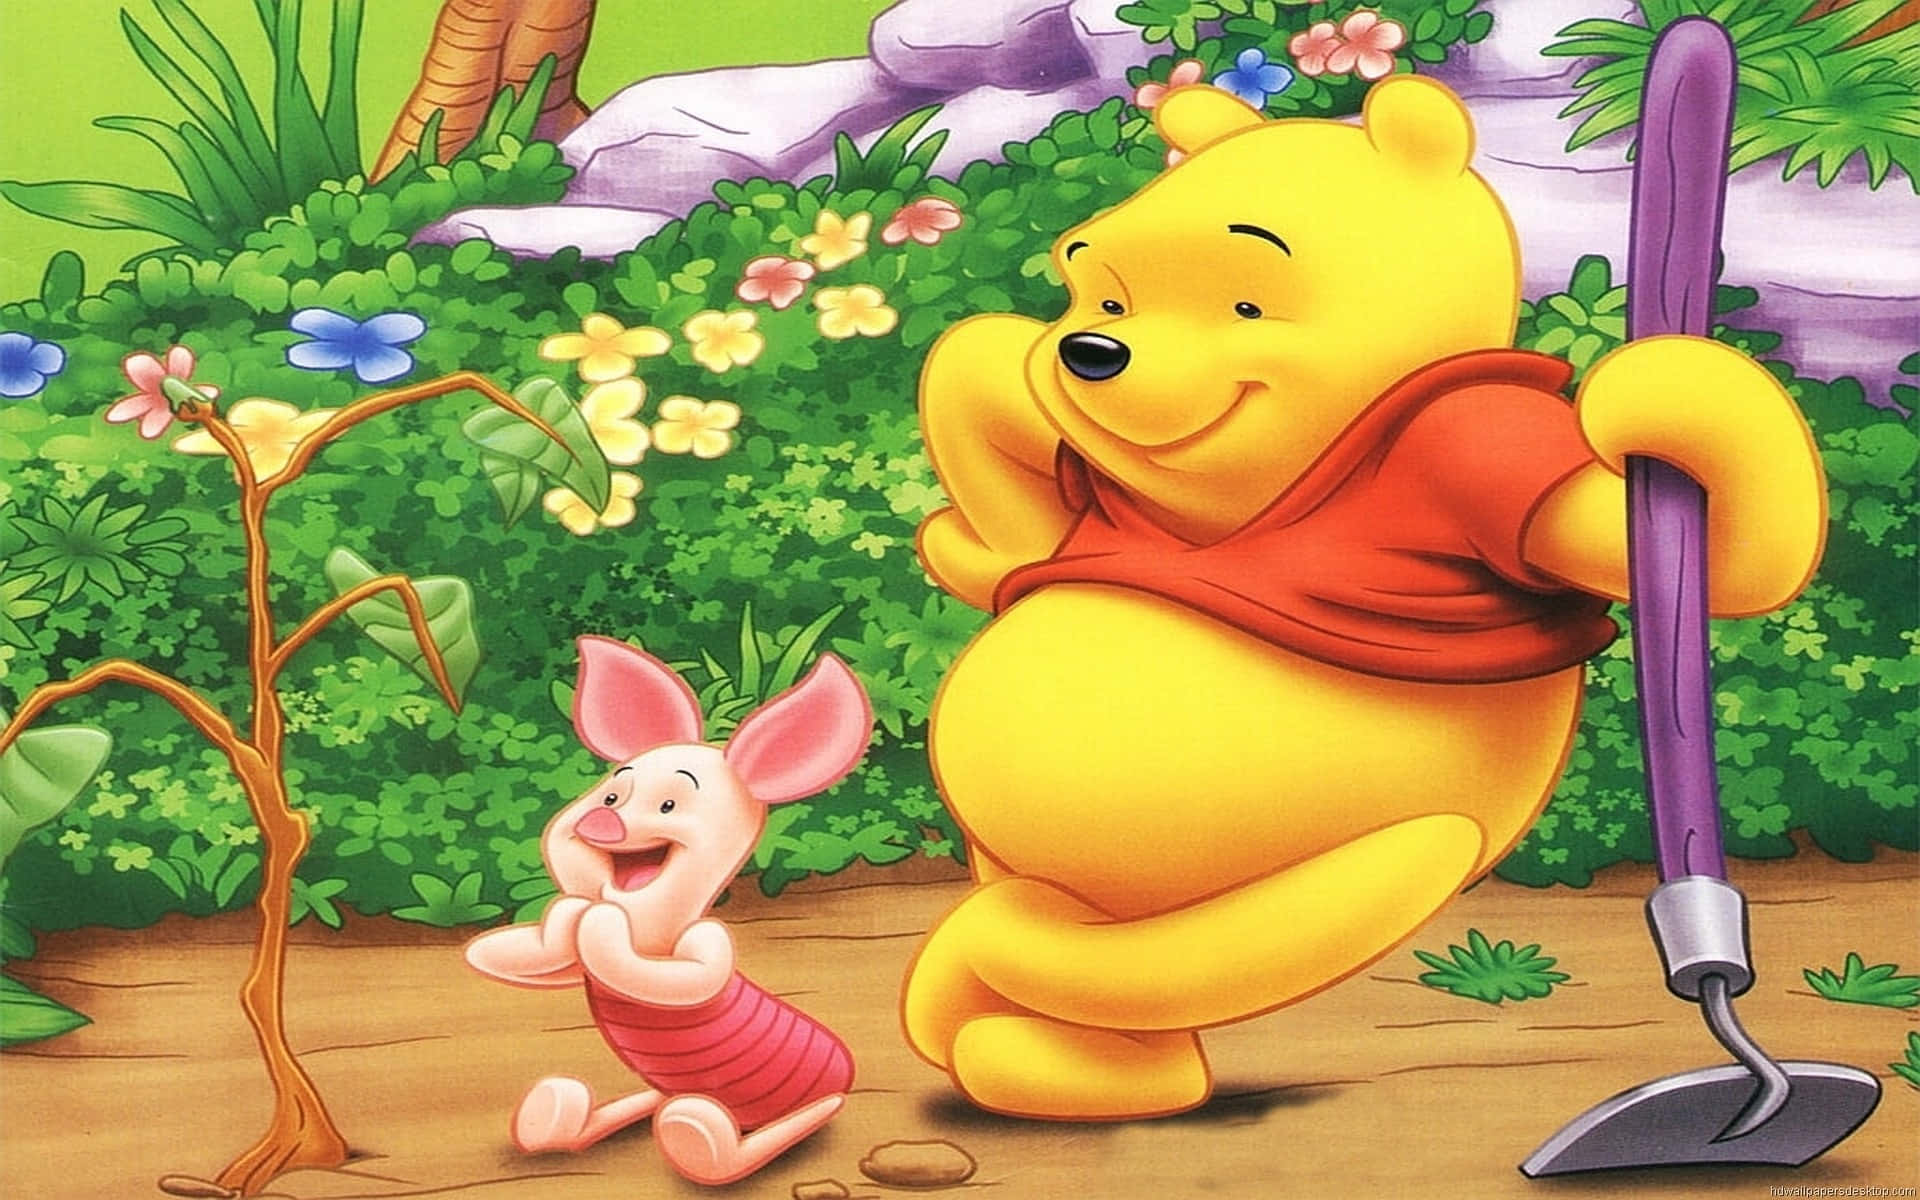 Enjoy a slice of friendship with Winnie The Pooh Wallpaper